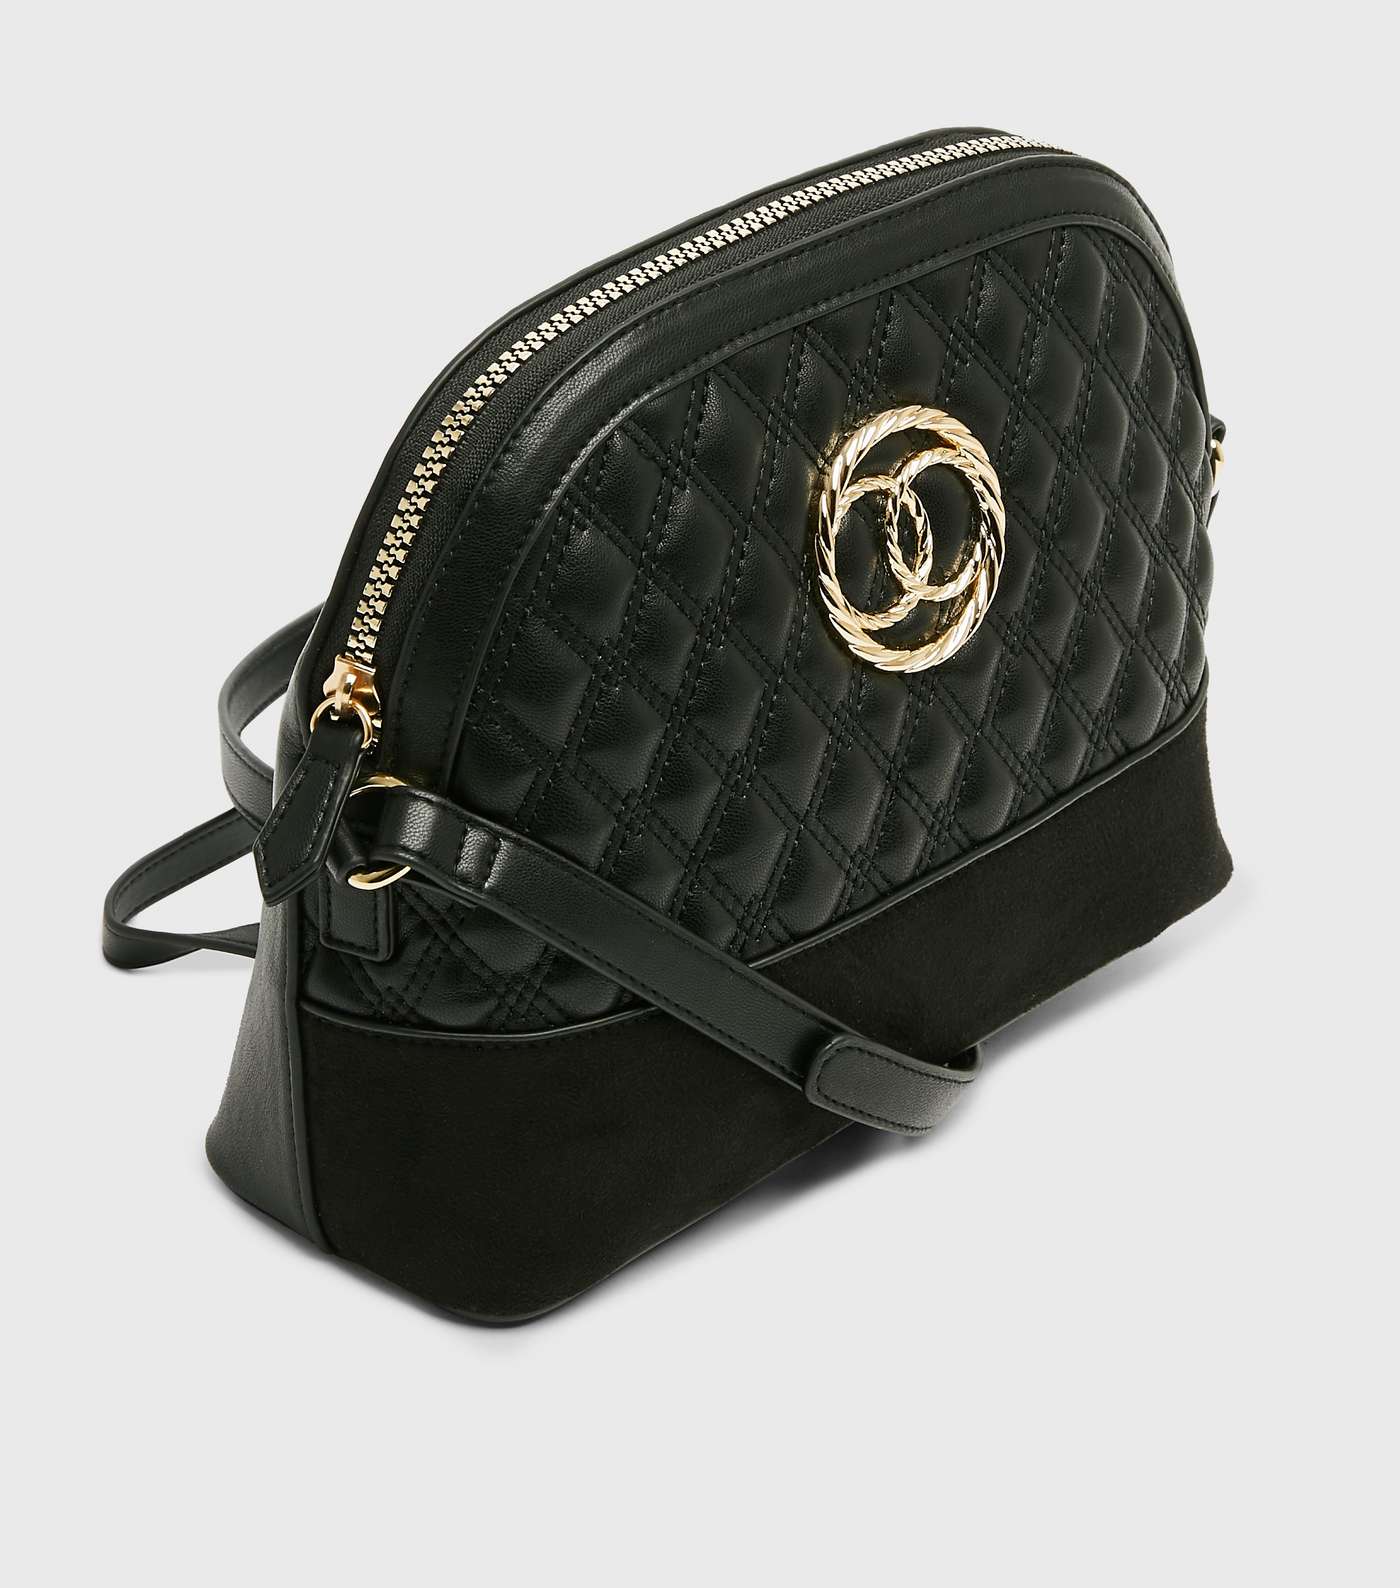 Black Quilted Leather-Look Ring Cross Body Bag Image 4